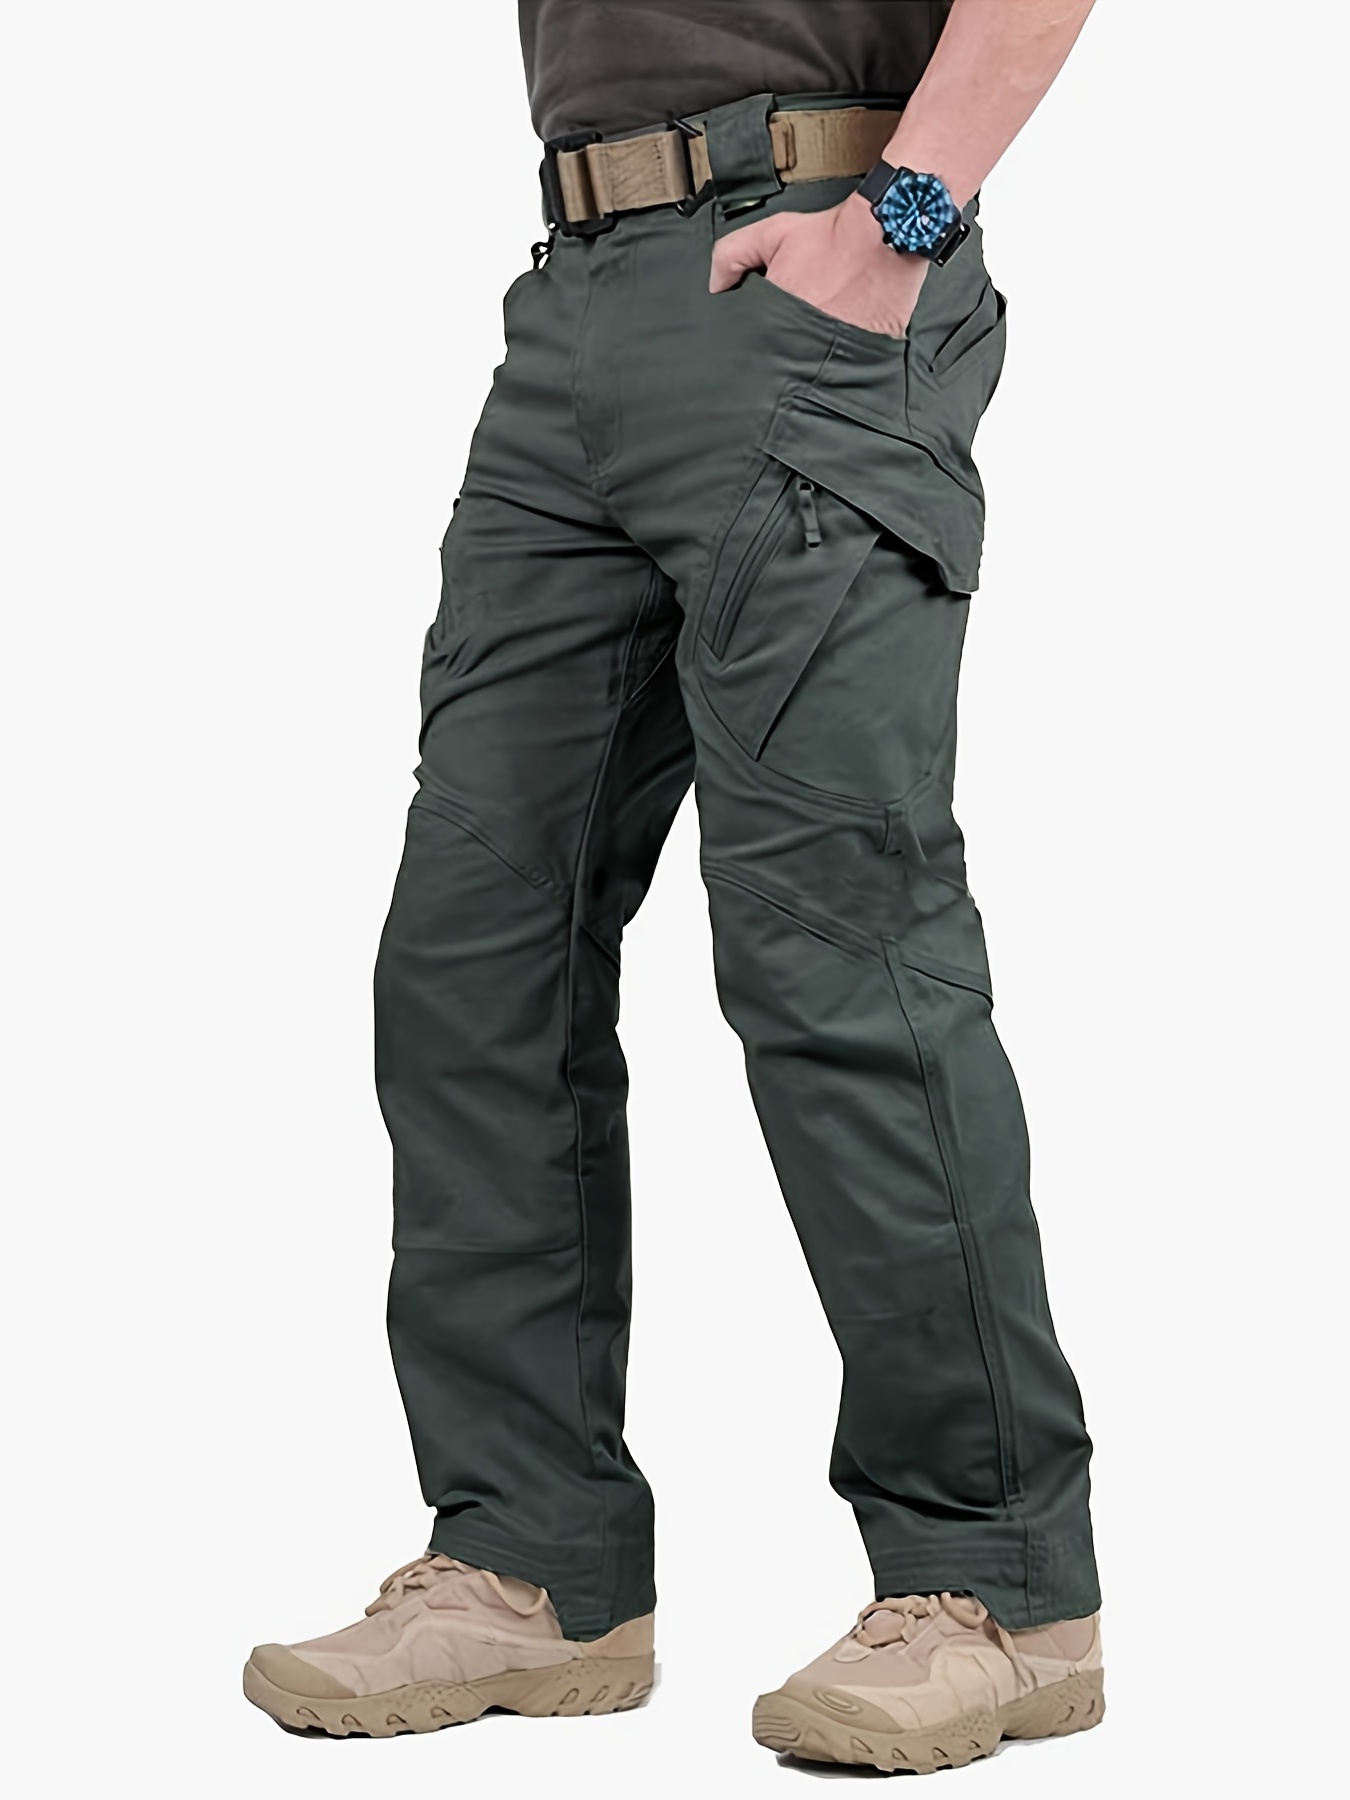 Warm Zipper Pocket Padded Trousers, Men's Casual Solid Color Waist  Drawstring Pants For Fall Winter